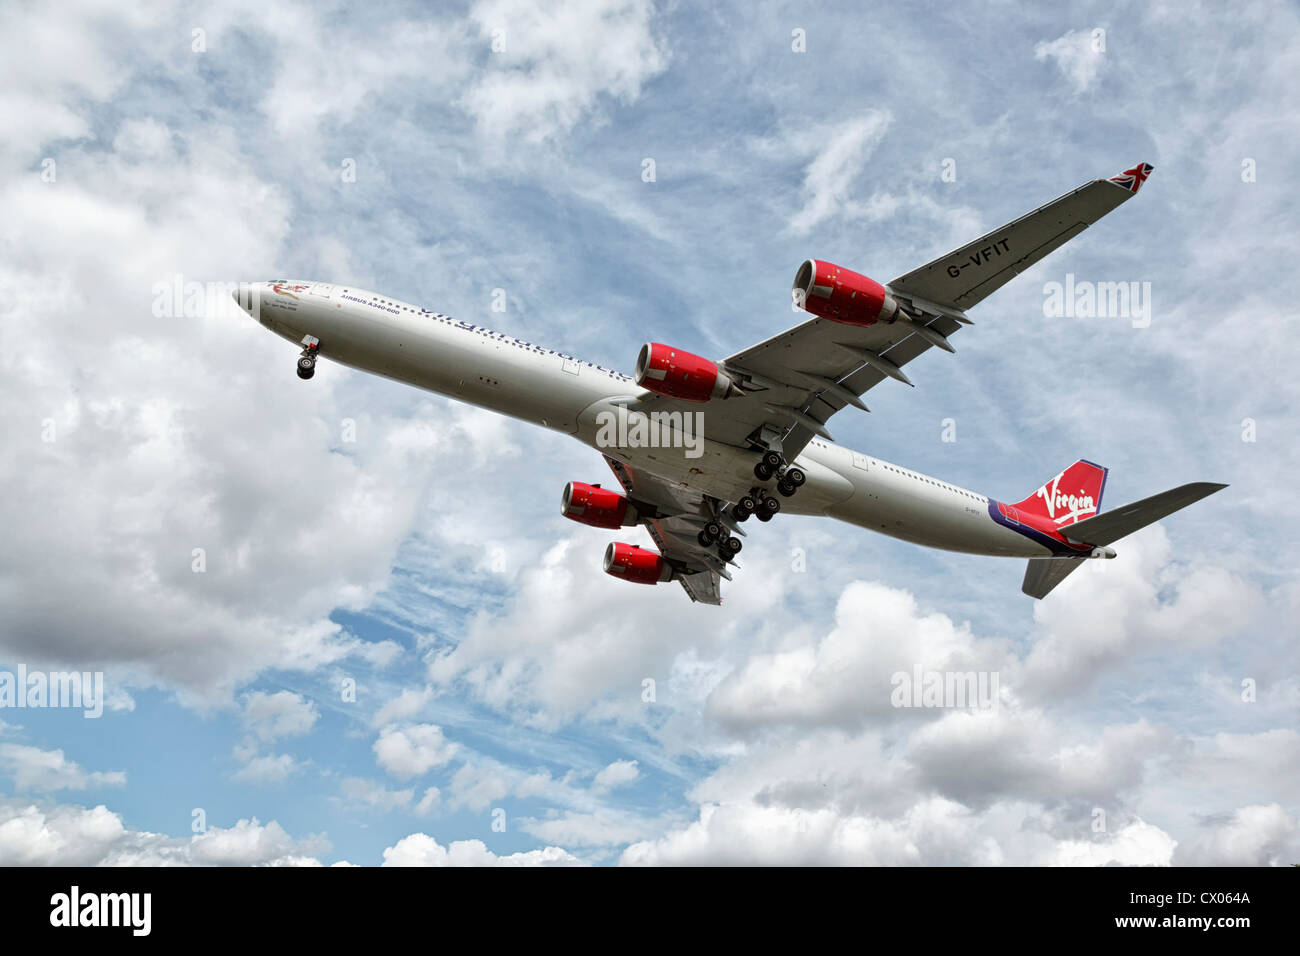 An Airbus A340 of Virgin Atlantic airlines on final approach Stock Photo